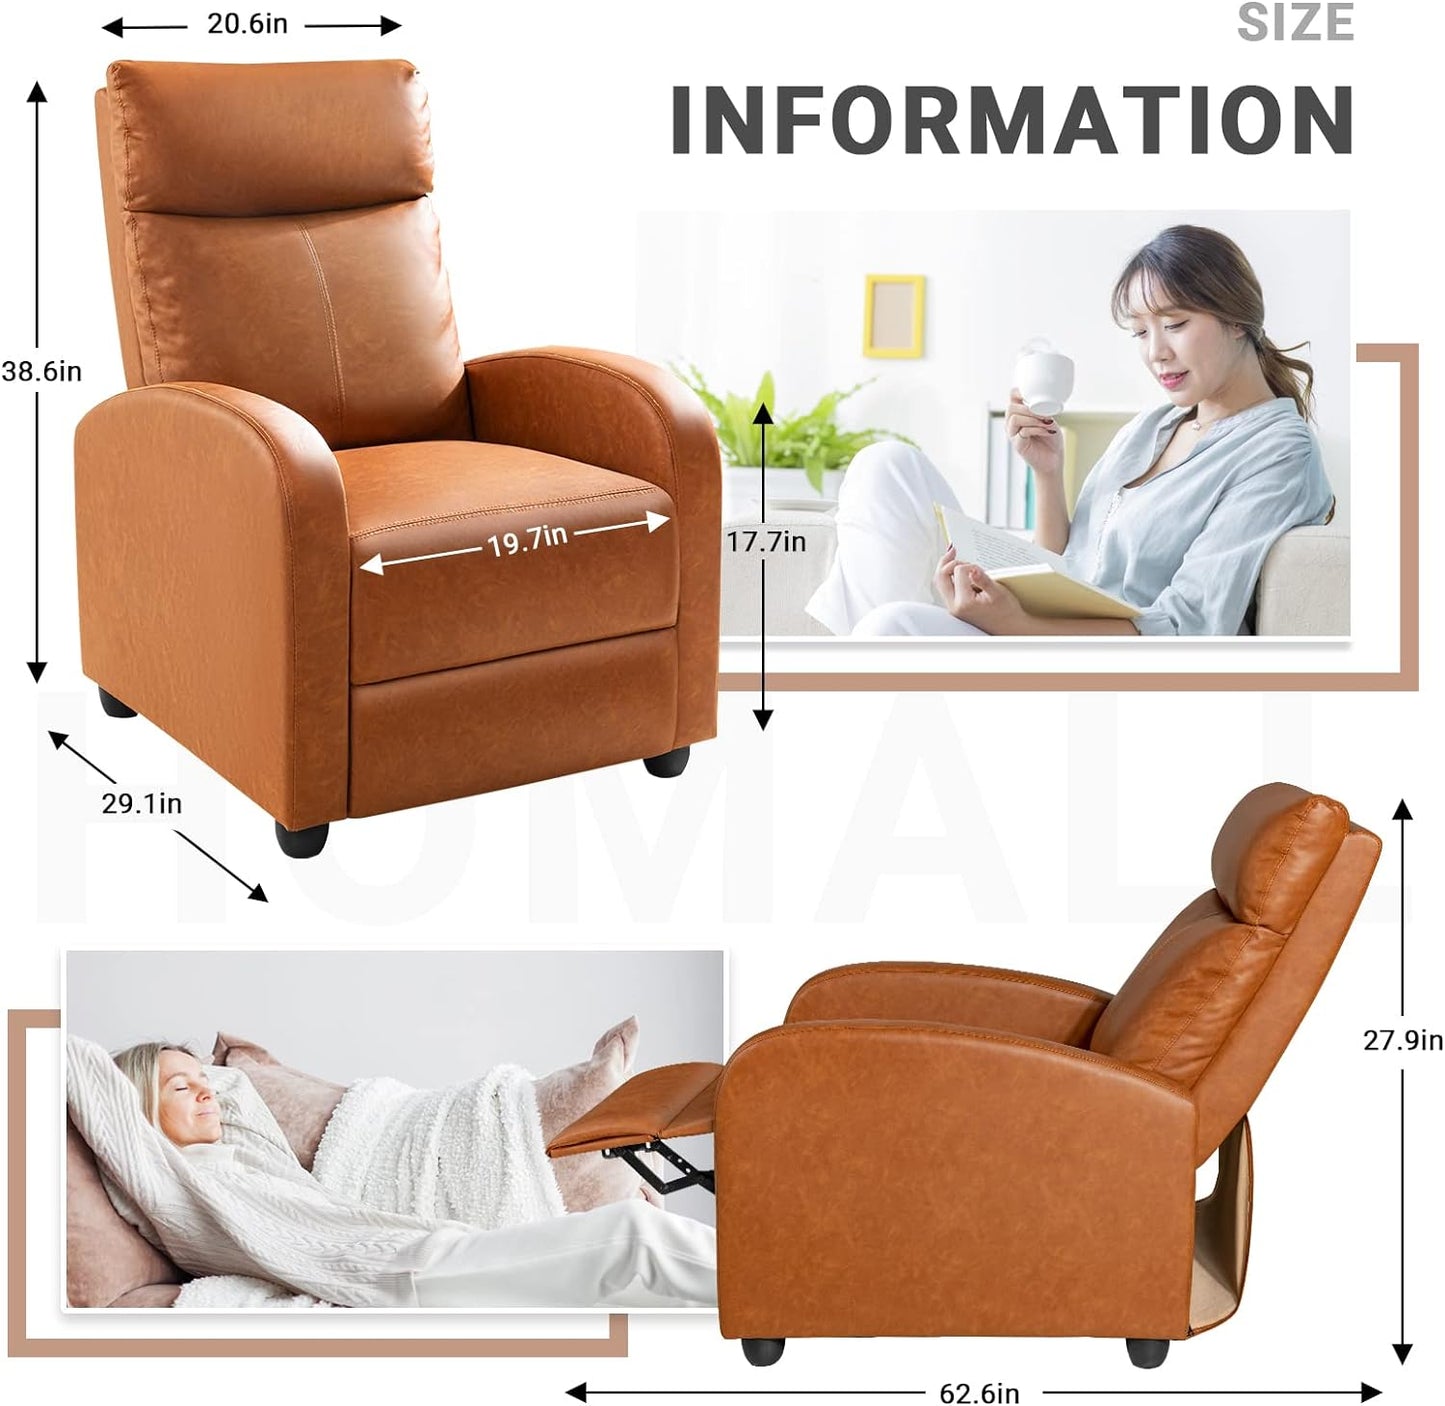 Recliner Chair, Recliner Sofa PU Leather for Adults, Recliners Home Theater Seating with Lumbar Support, Reclining Sofa Chair for Living Room (Khaki, Leather)